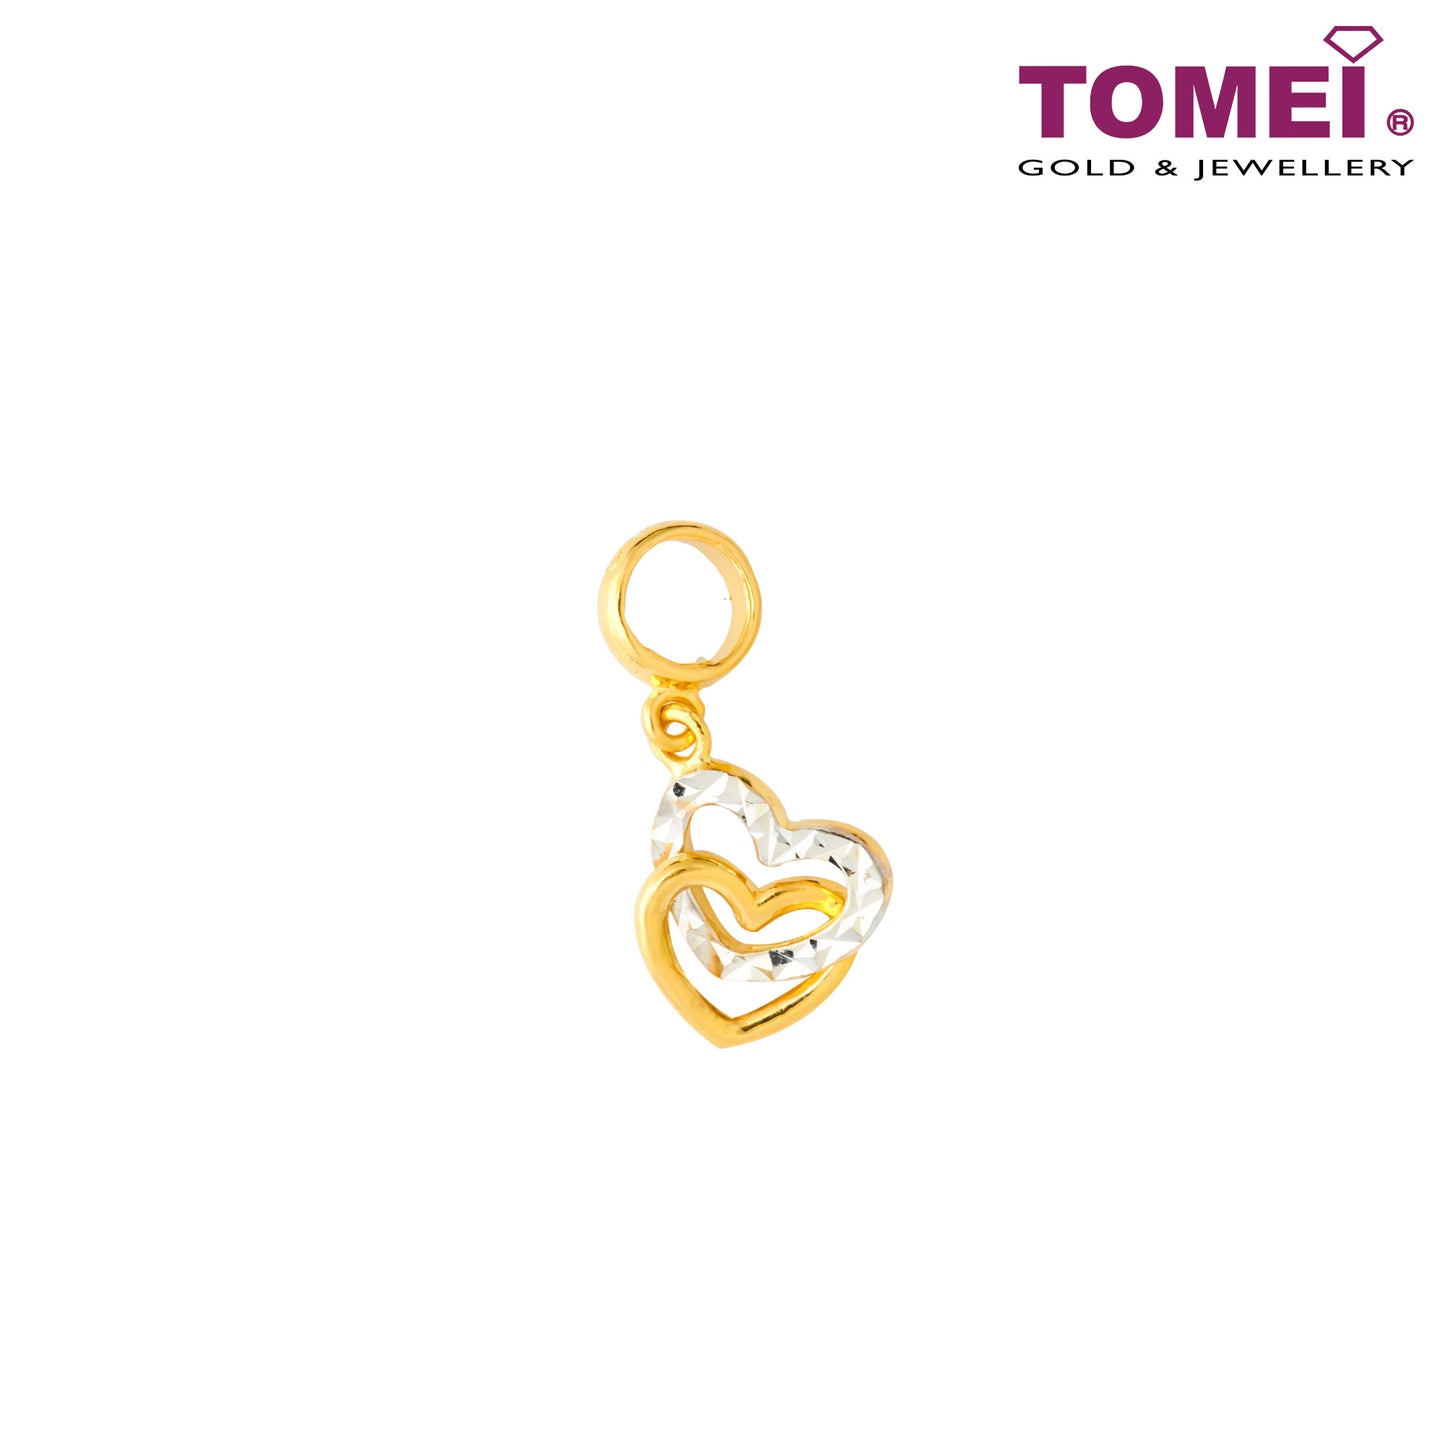 Dual-Tone Entwined Hearts Charm | Tomei Yellow Gold 916 (22K)